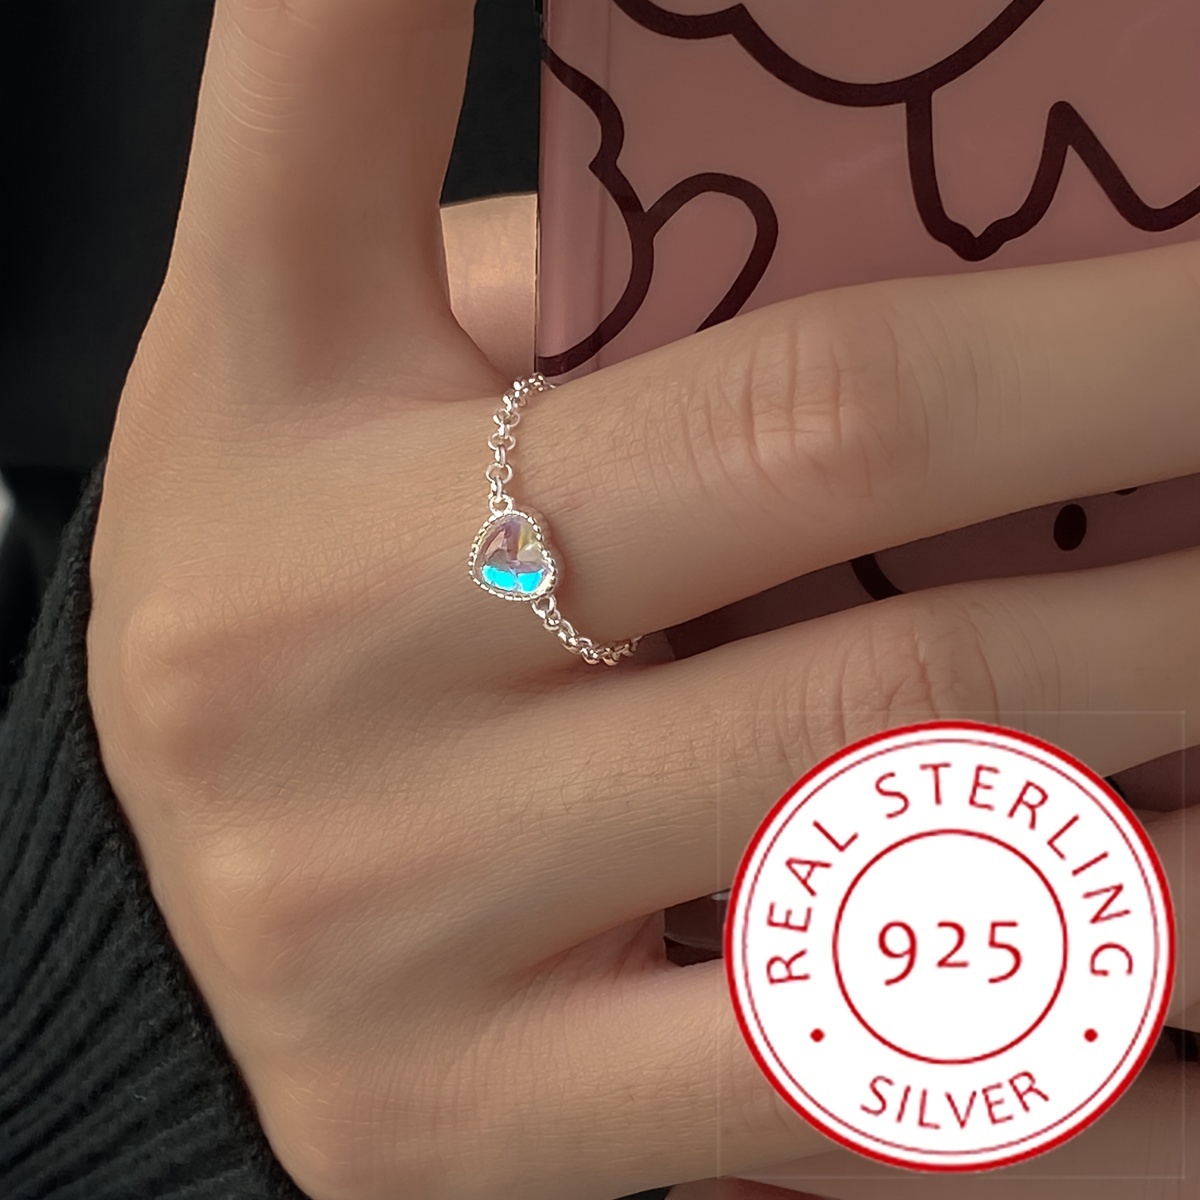 

925 Sterling Silver Ring Dainty Heart Design Inlaid Waterish Moonstone High Quality Engagement/ Wedding Ring Gift For Her